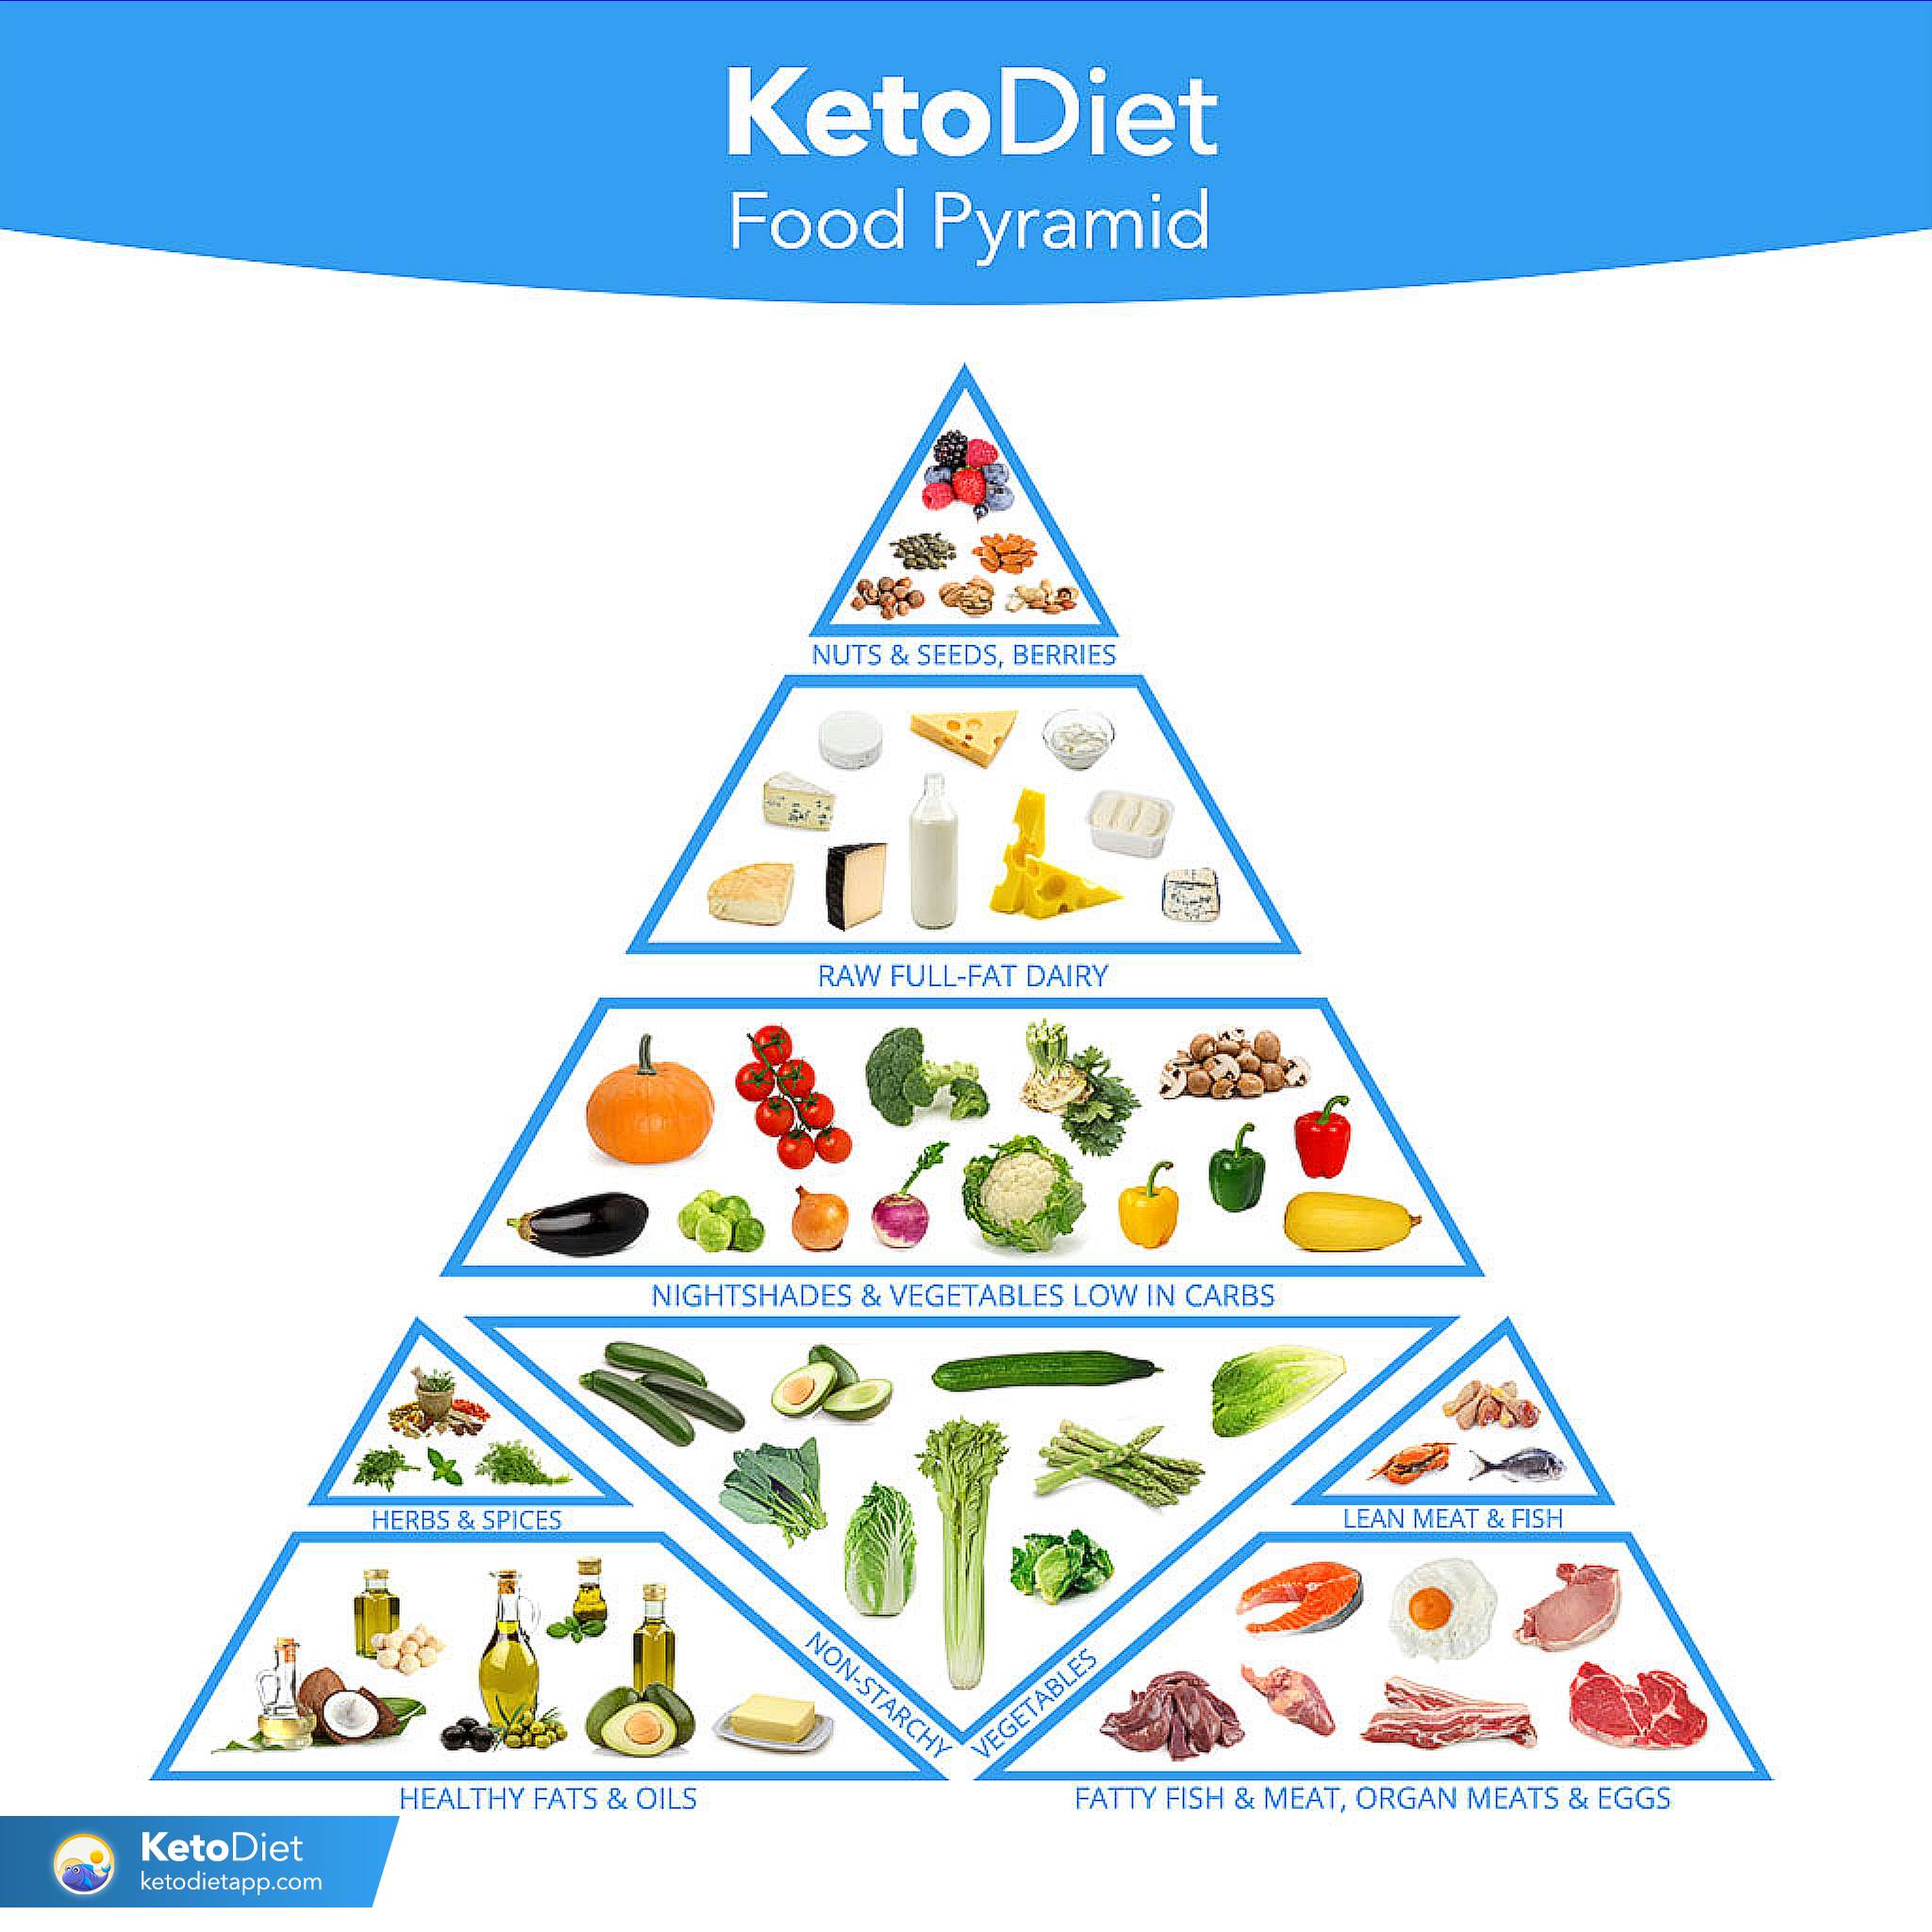 Complete Keto Diet Food List: What to Eat and Avoid on a Low-Carb Diet |  KetoDiet Blog